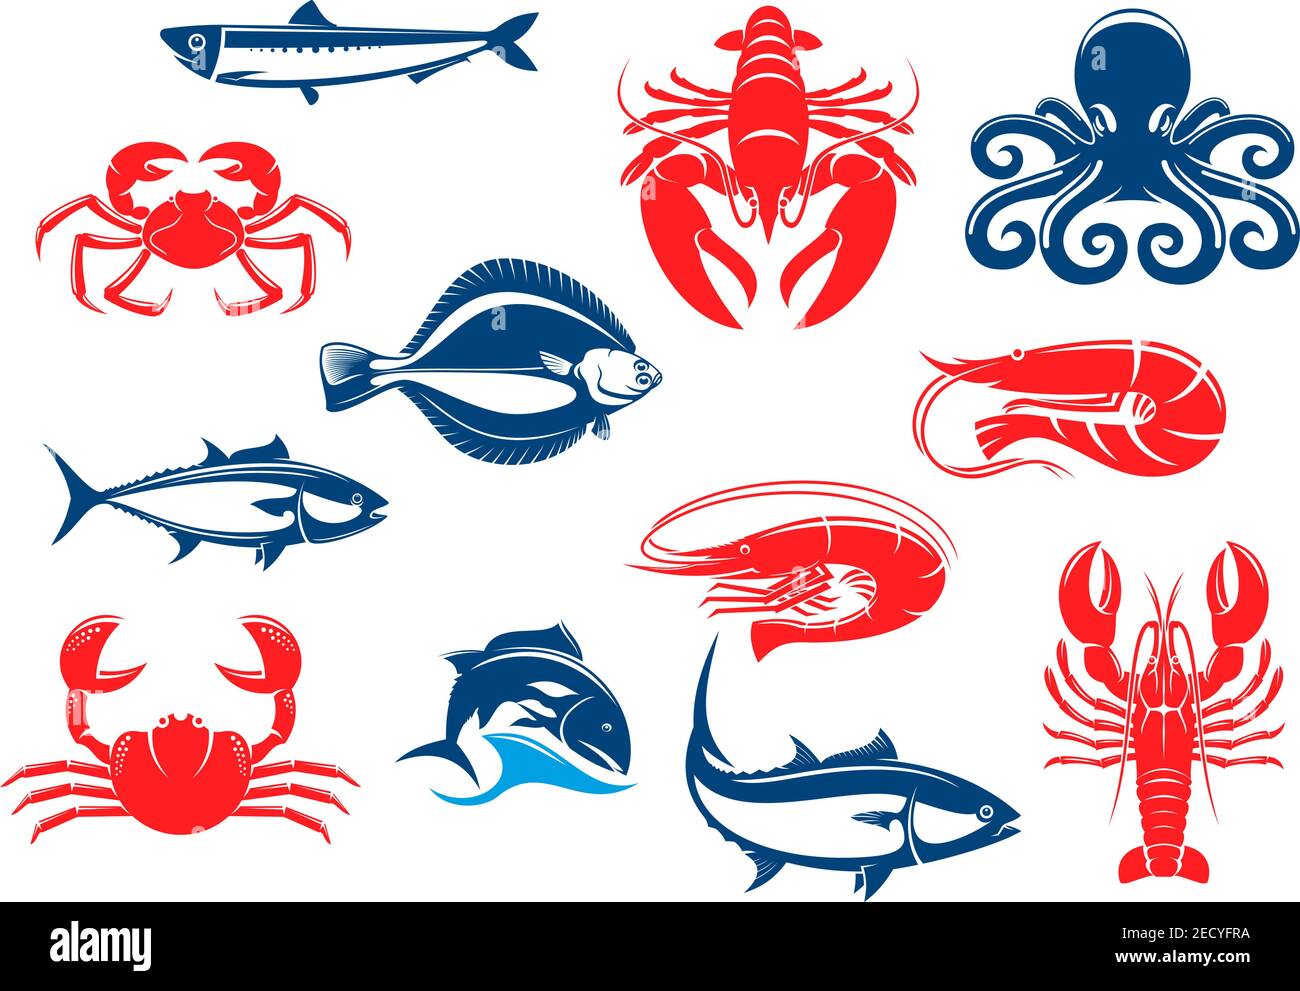 Seafood icon set with fish and crustacean. Crab, shrimp, salmon, lobster,  octopus, tuna, prawn, flounder, crayfish, anchovy isolated icons for seafood  Stock Vector Image & Art - Alamy